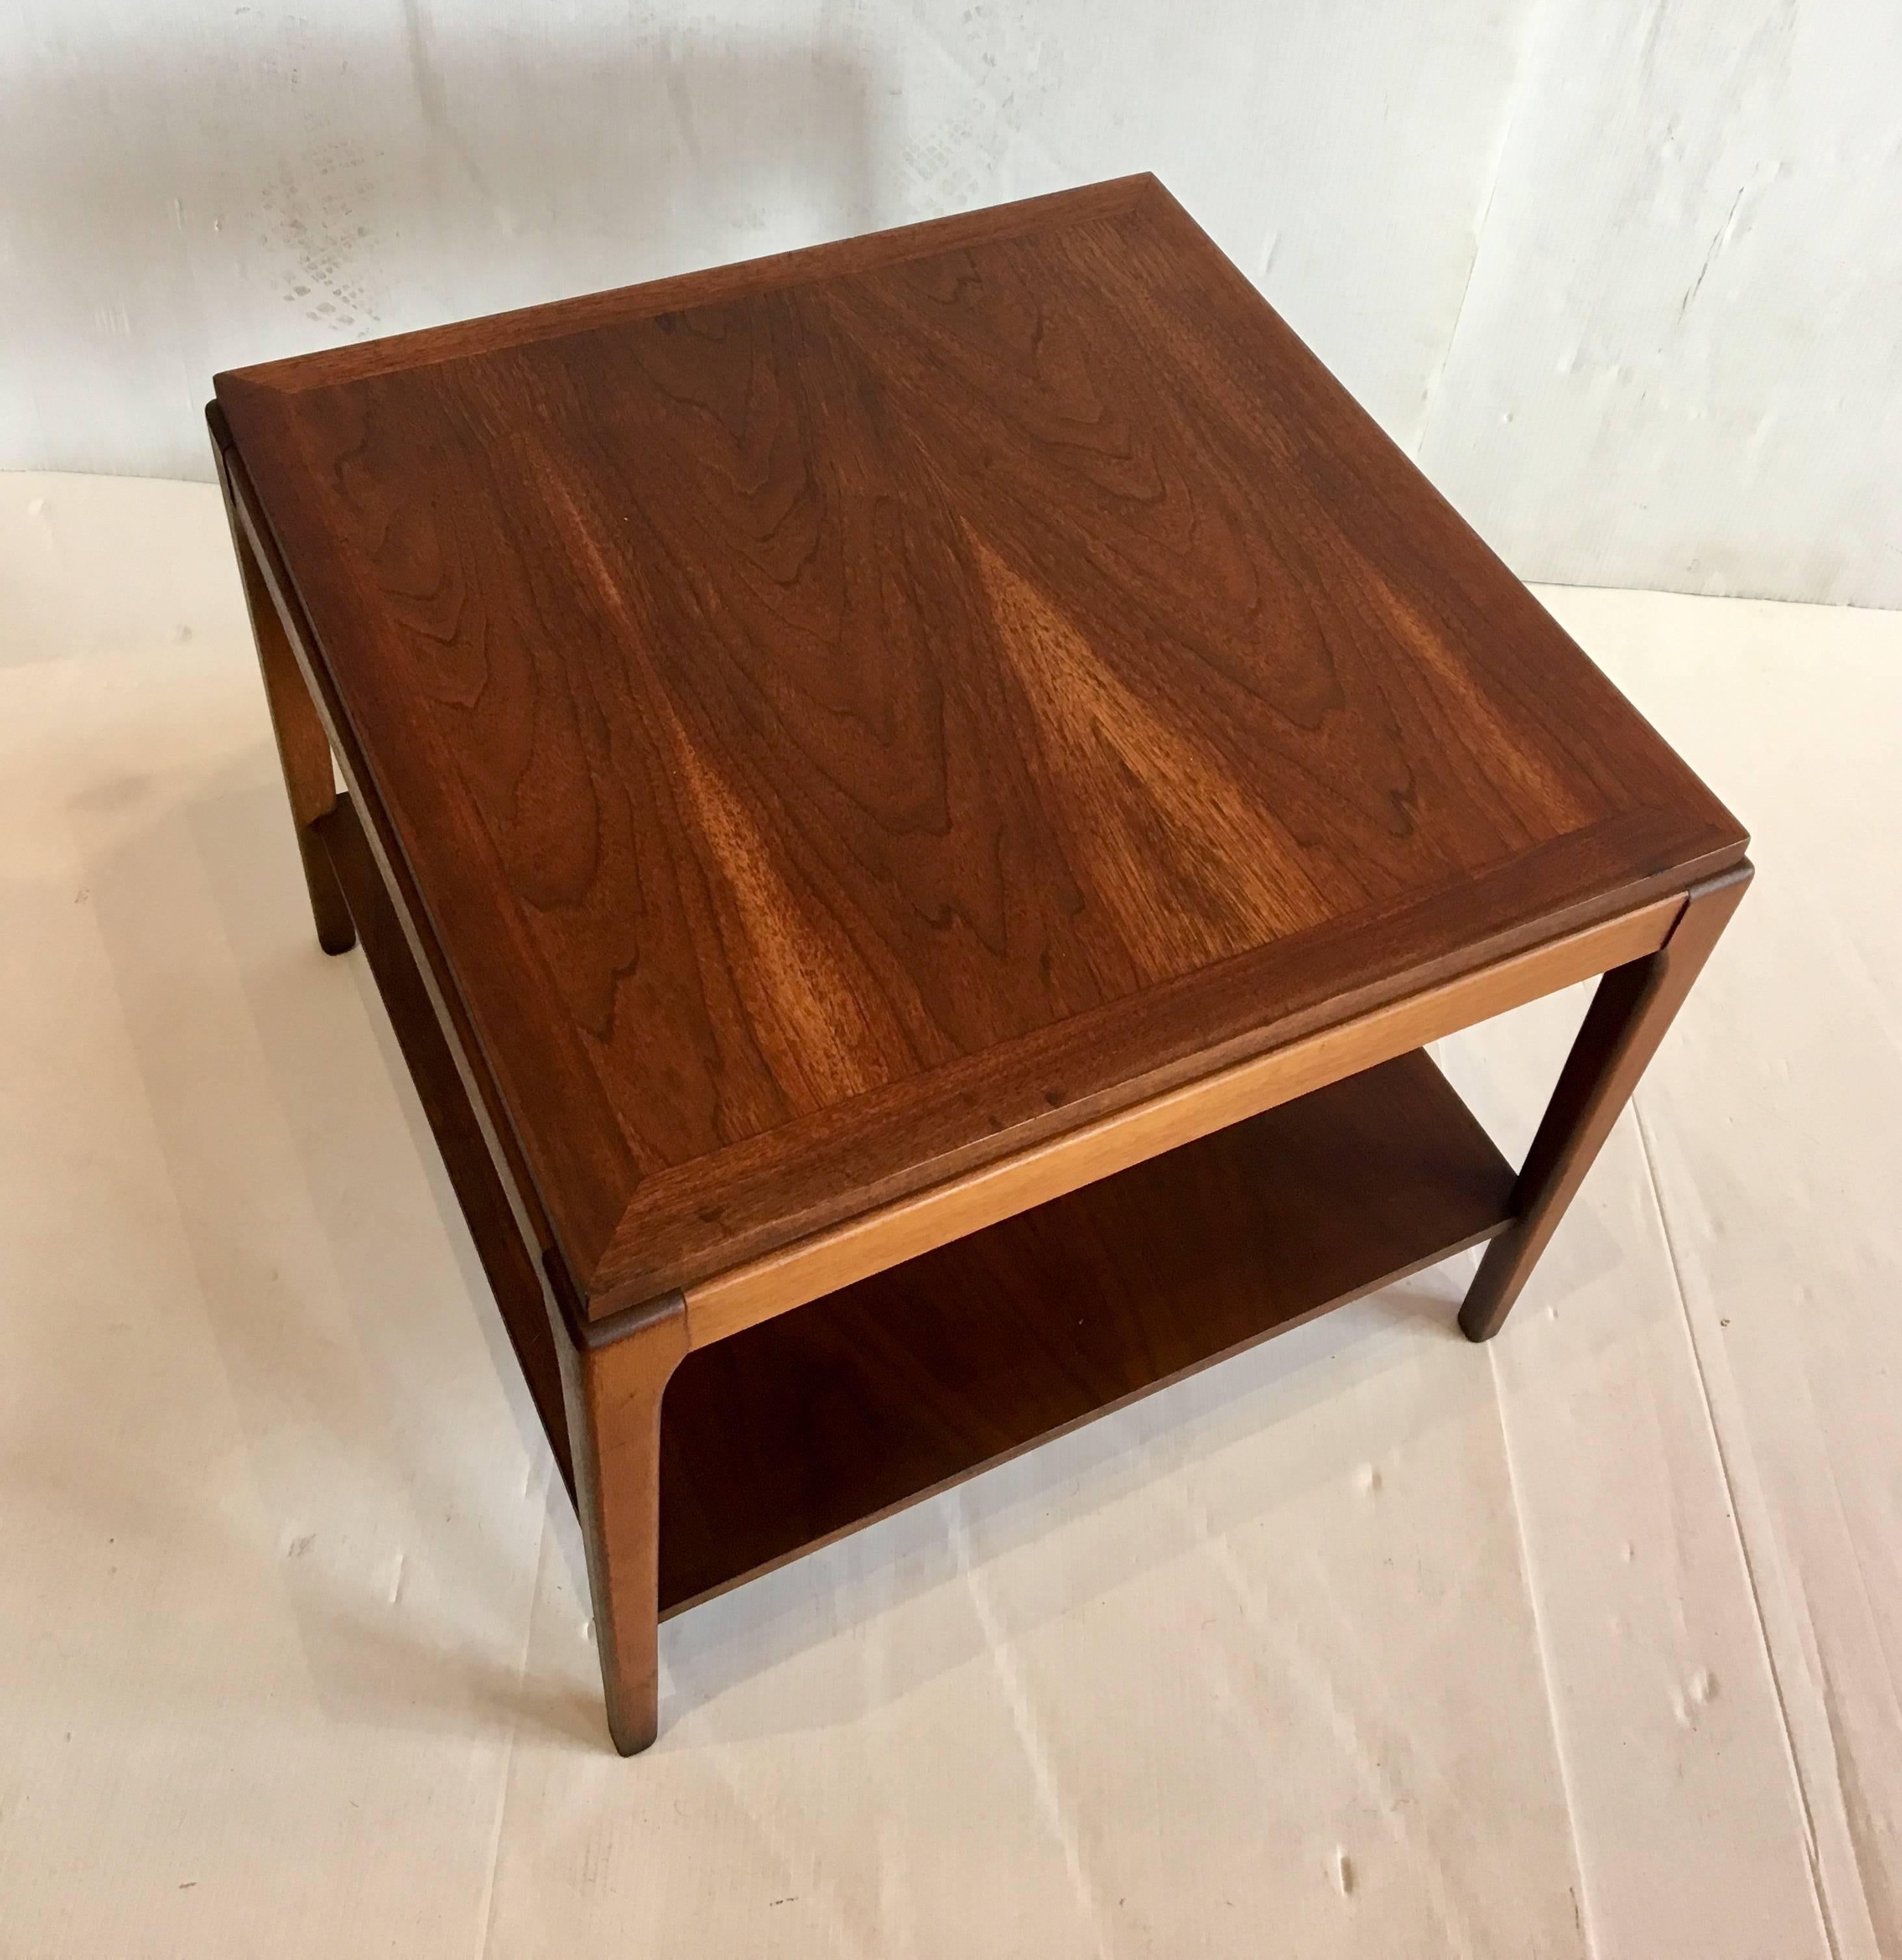 Beautiful and versatile square cocktail end table, circa 1950s freshly refinished and in great condition solid and sturdy with a magazine holder shelf on the bottom can be used as a corner table or in between two chairs.